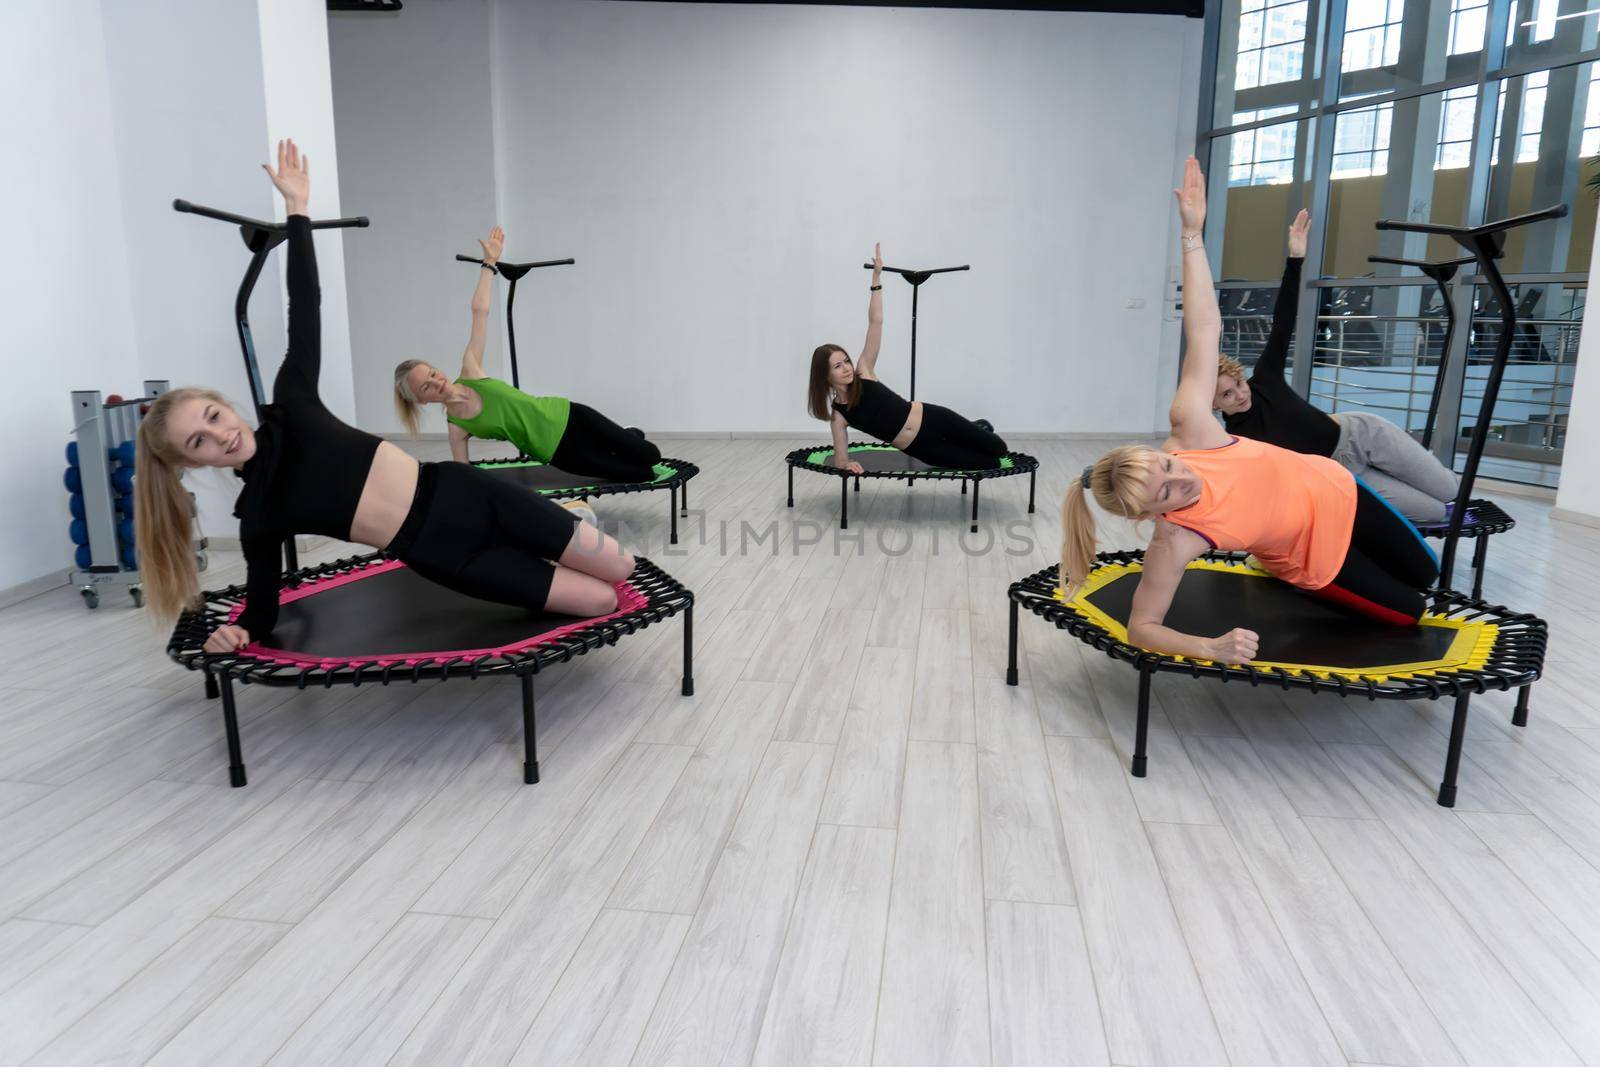 Lie down trampoline active fitness group center friends youth athlete activity, concept training athletic from exercise from gym happiness, class trainer. Jump club studio, room by 89167702191